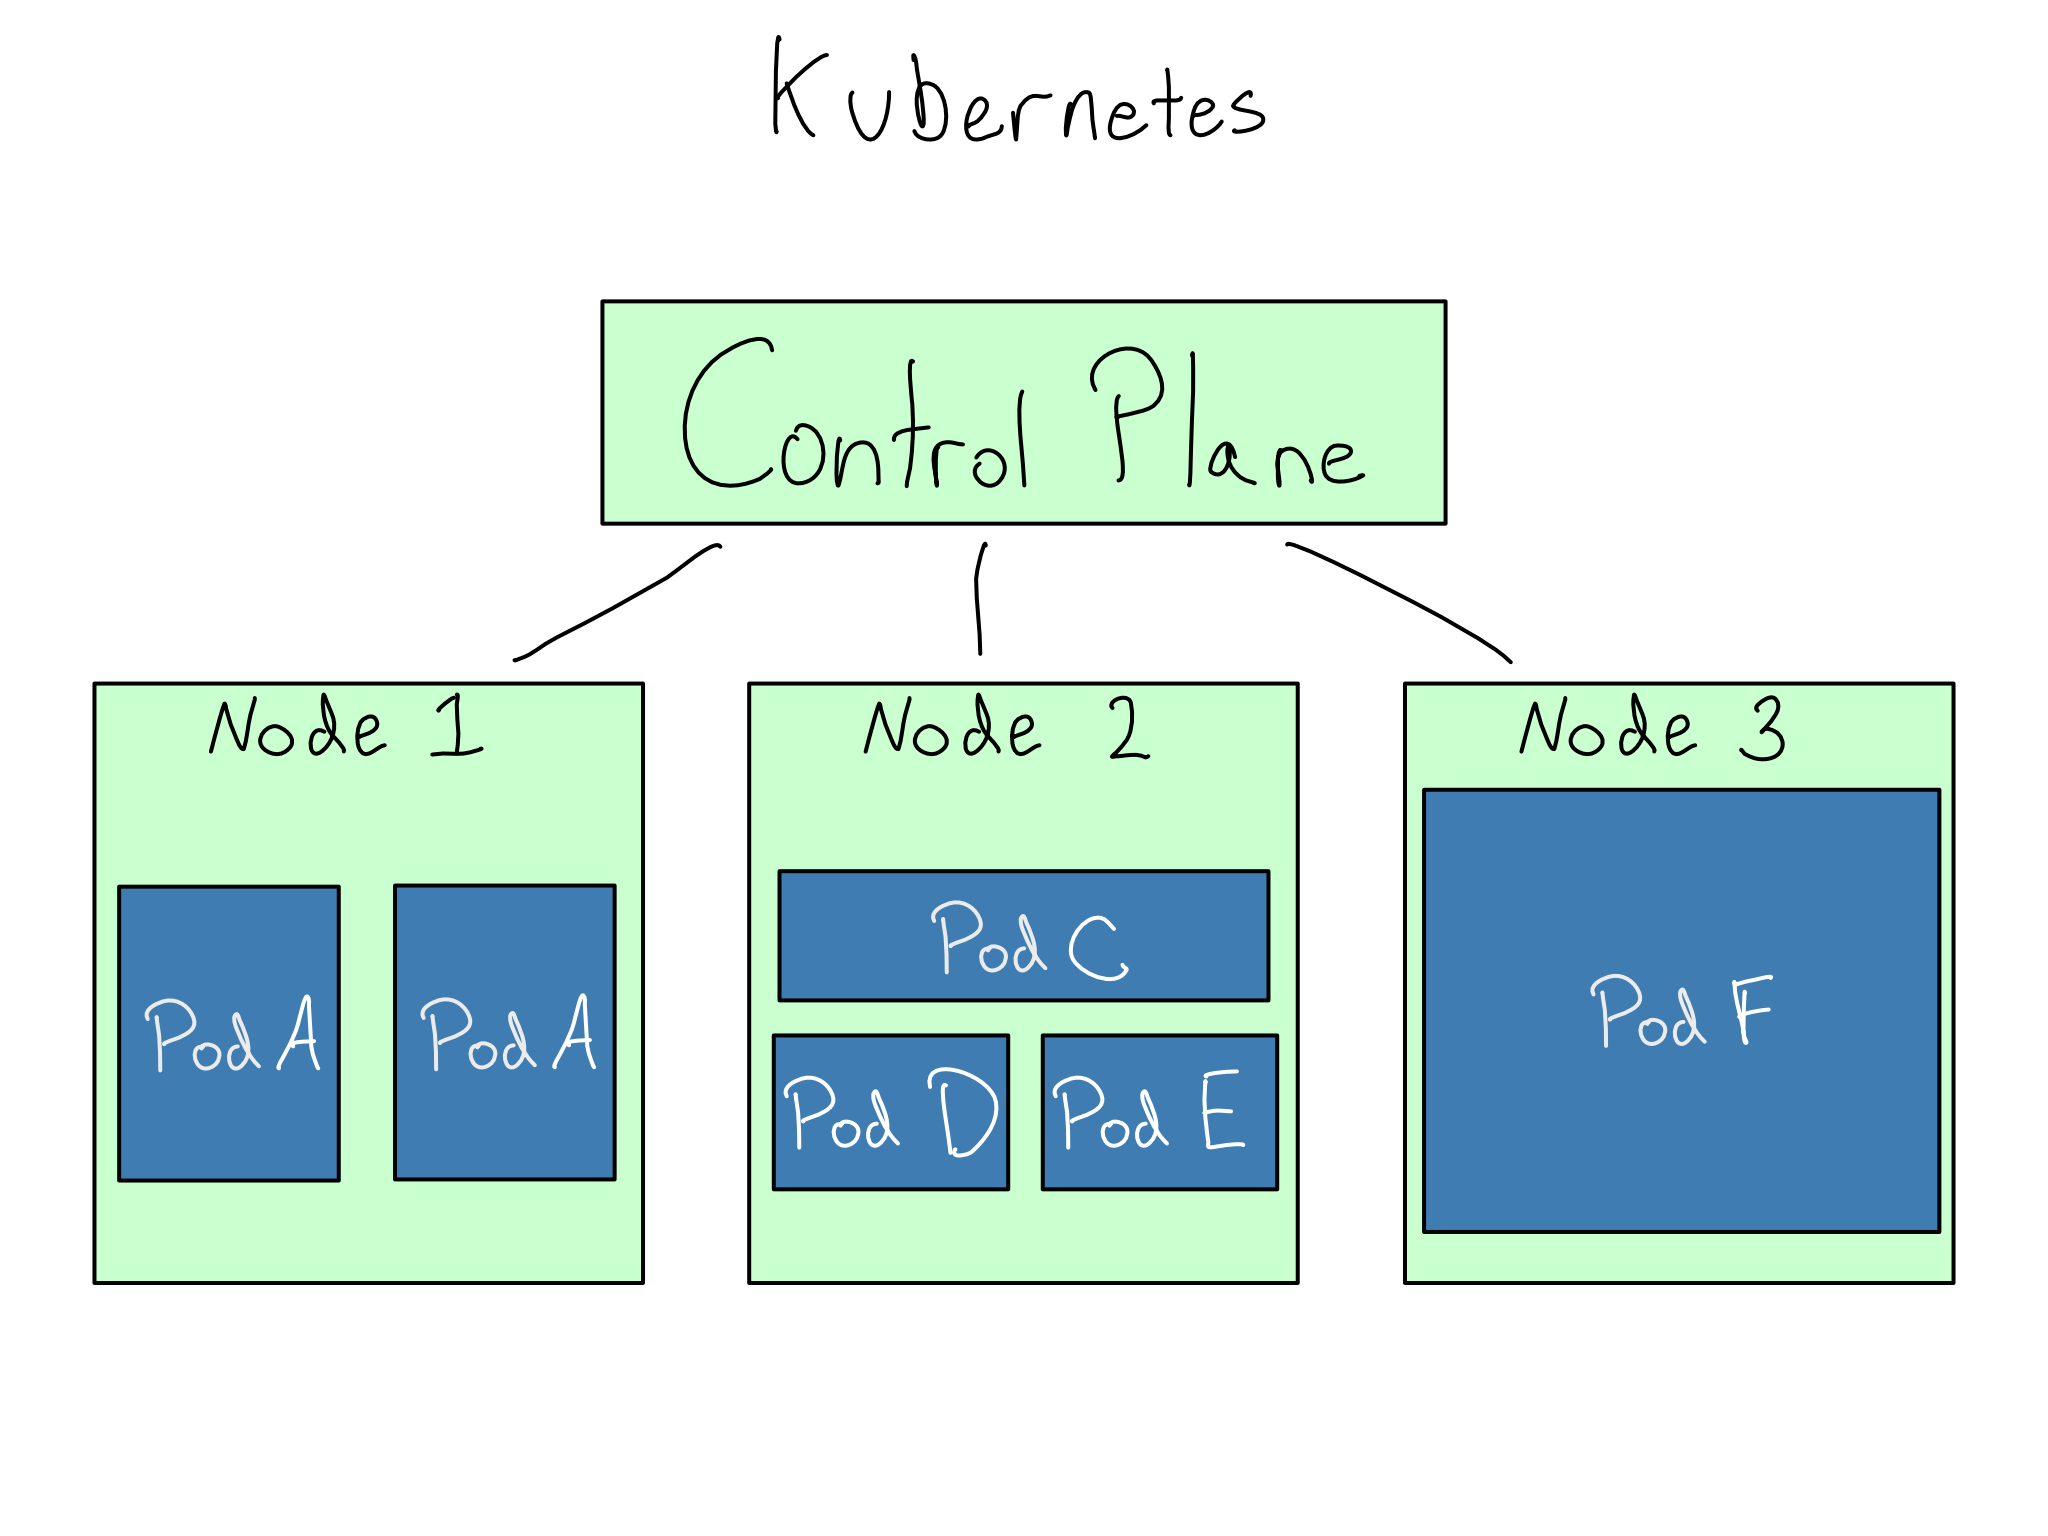 Image of a Kubernetes cluster with 3 nodes and 6 pods of various sizes arranged across the nodes.